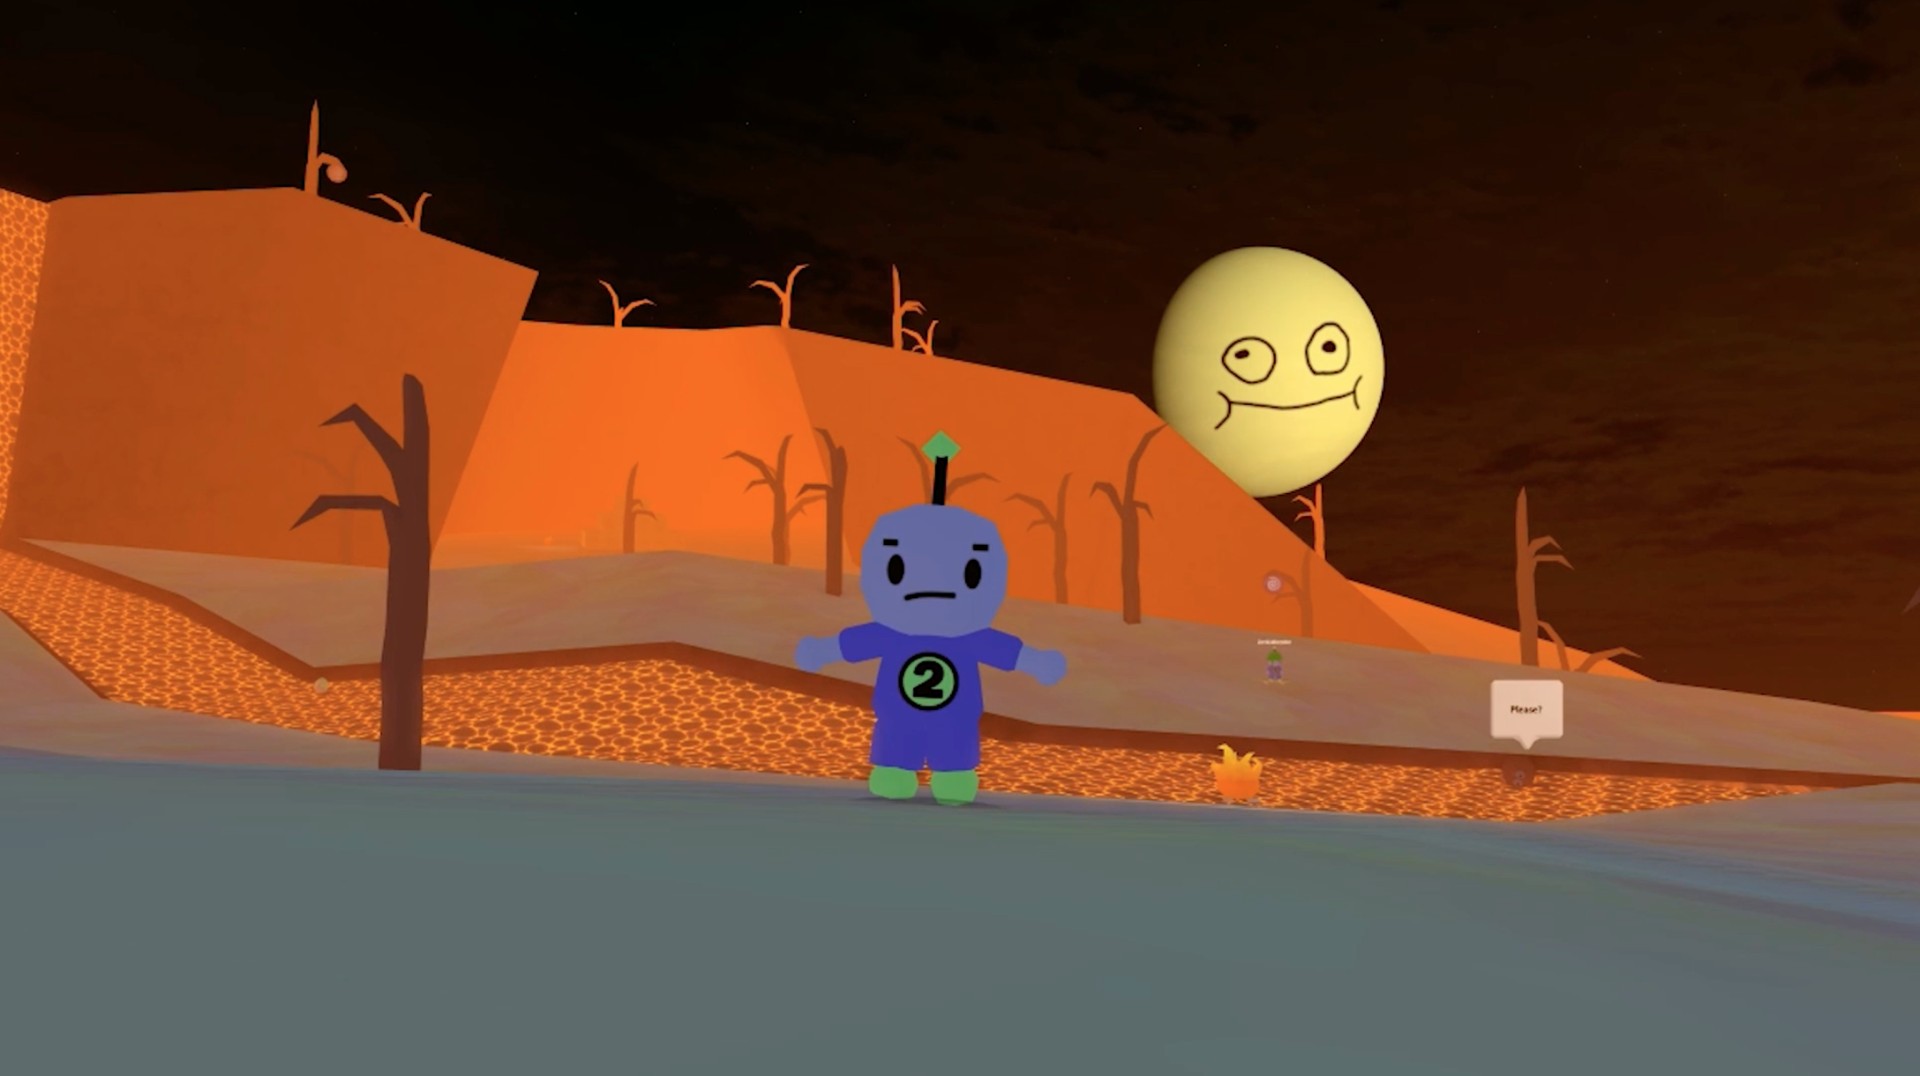 3d Platformer Robot 64 Is Now Available On Roblox For Xbox One